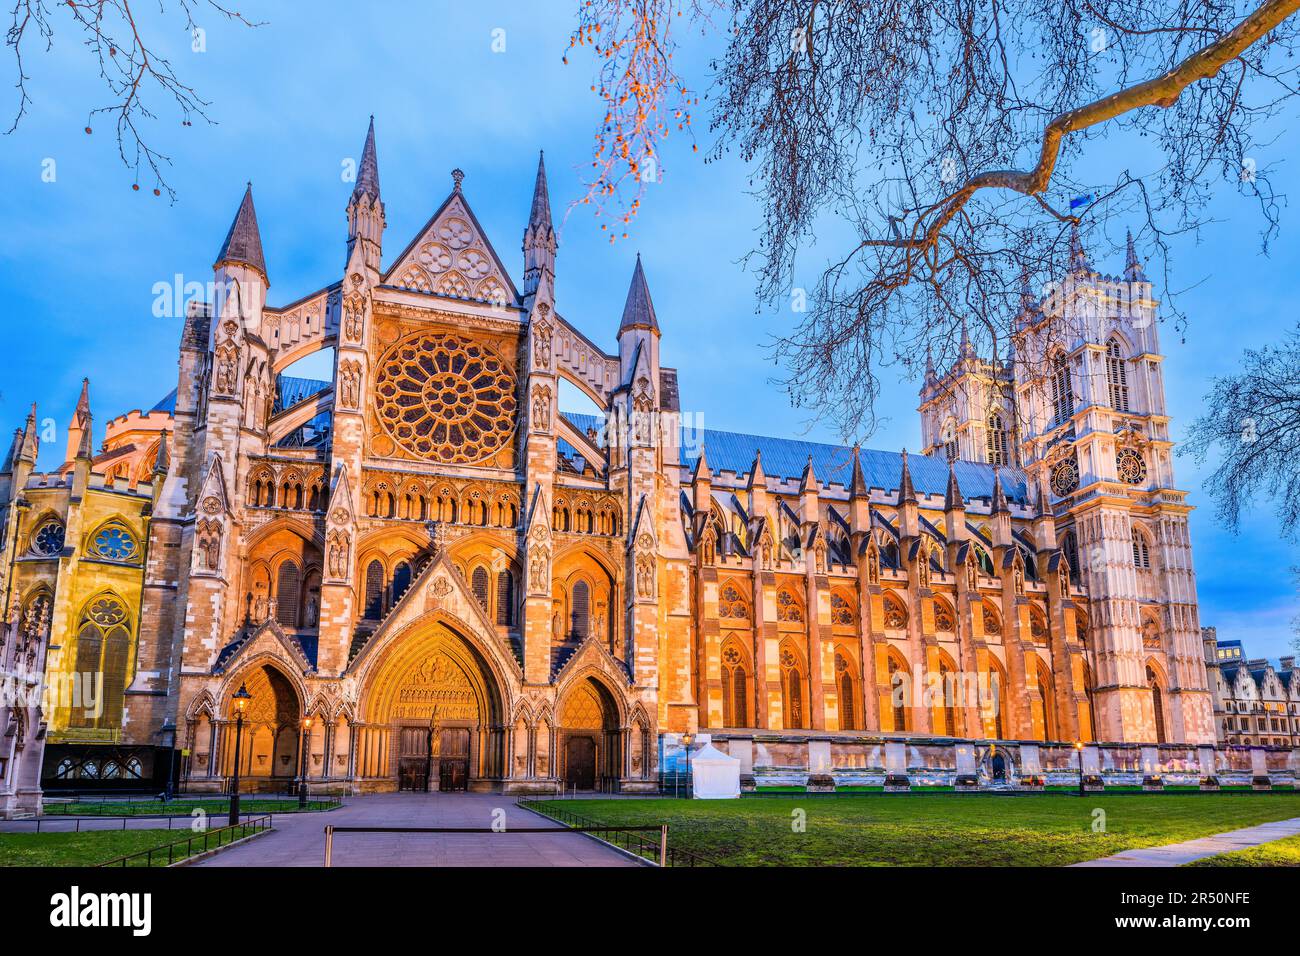 London, United Kingdom. Westminster Abbey in the City of Westminster, London. Stock Photo